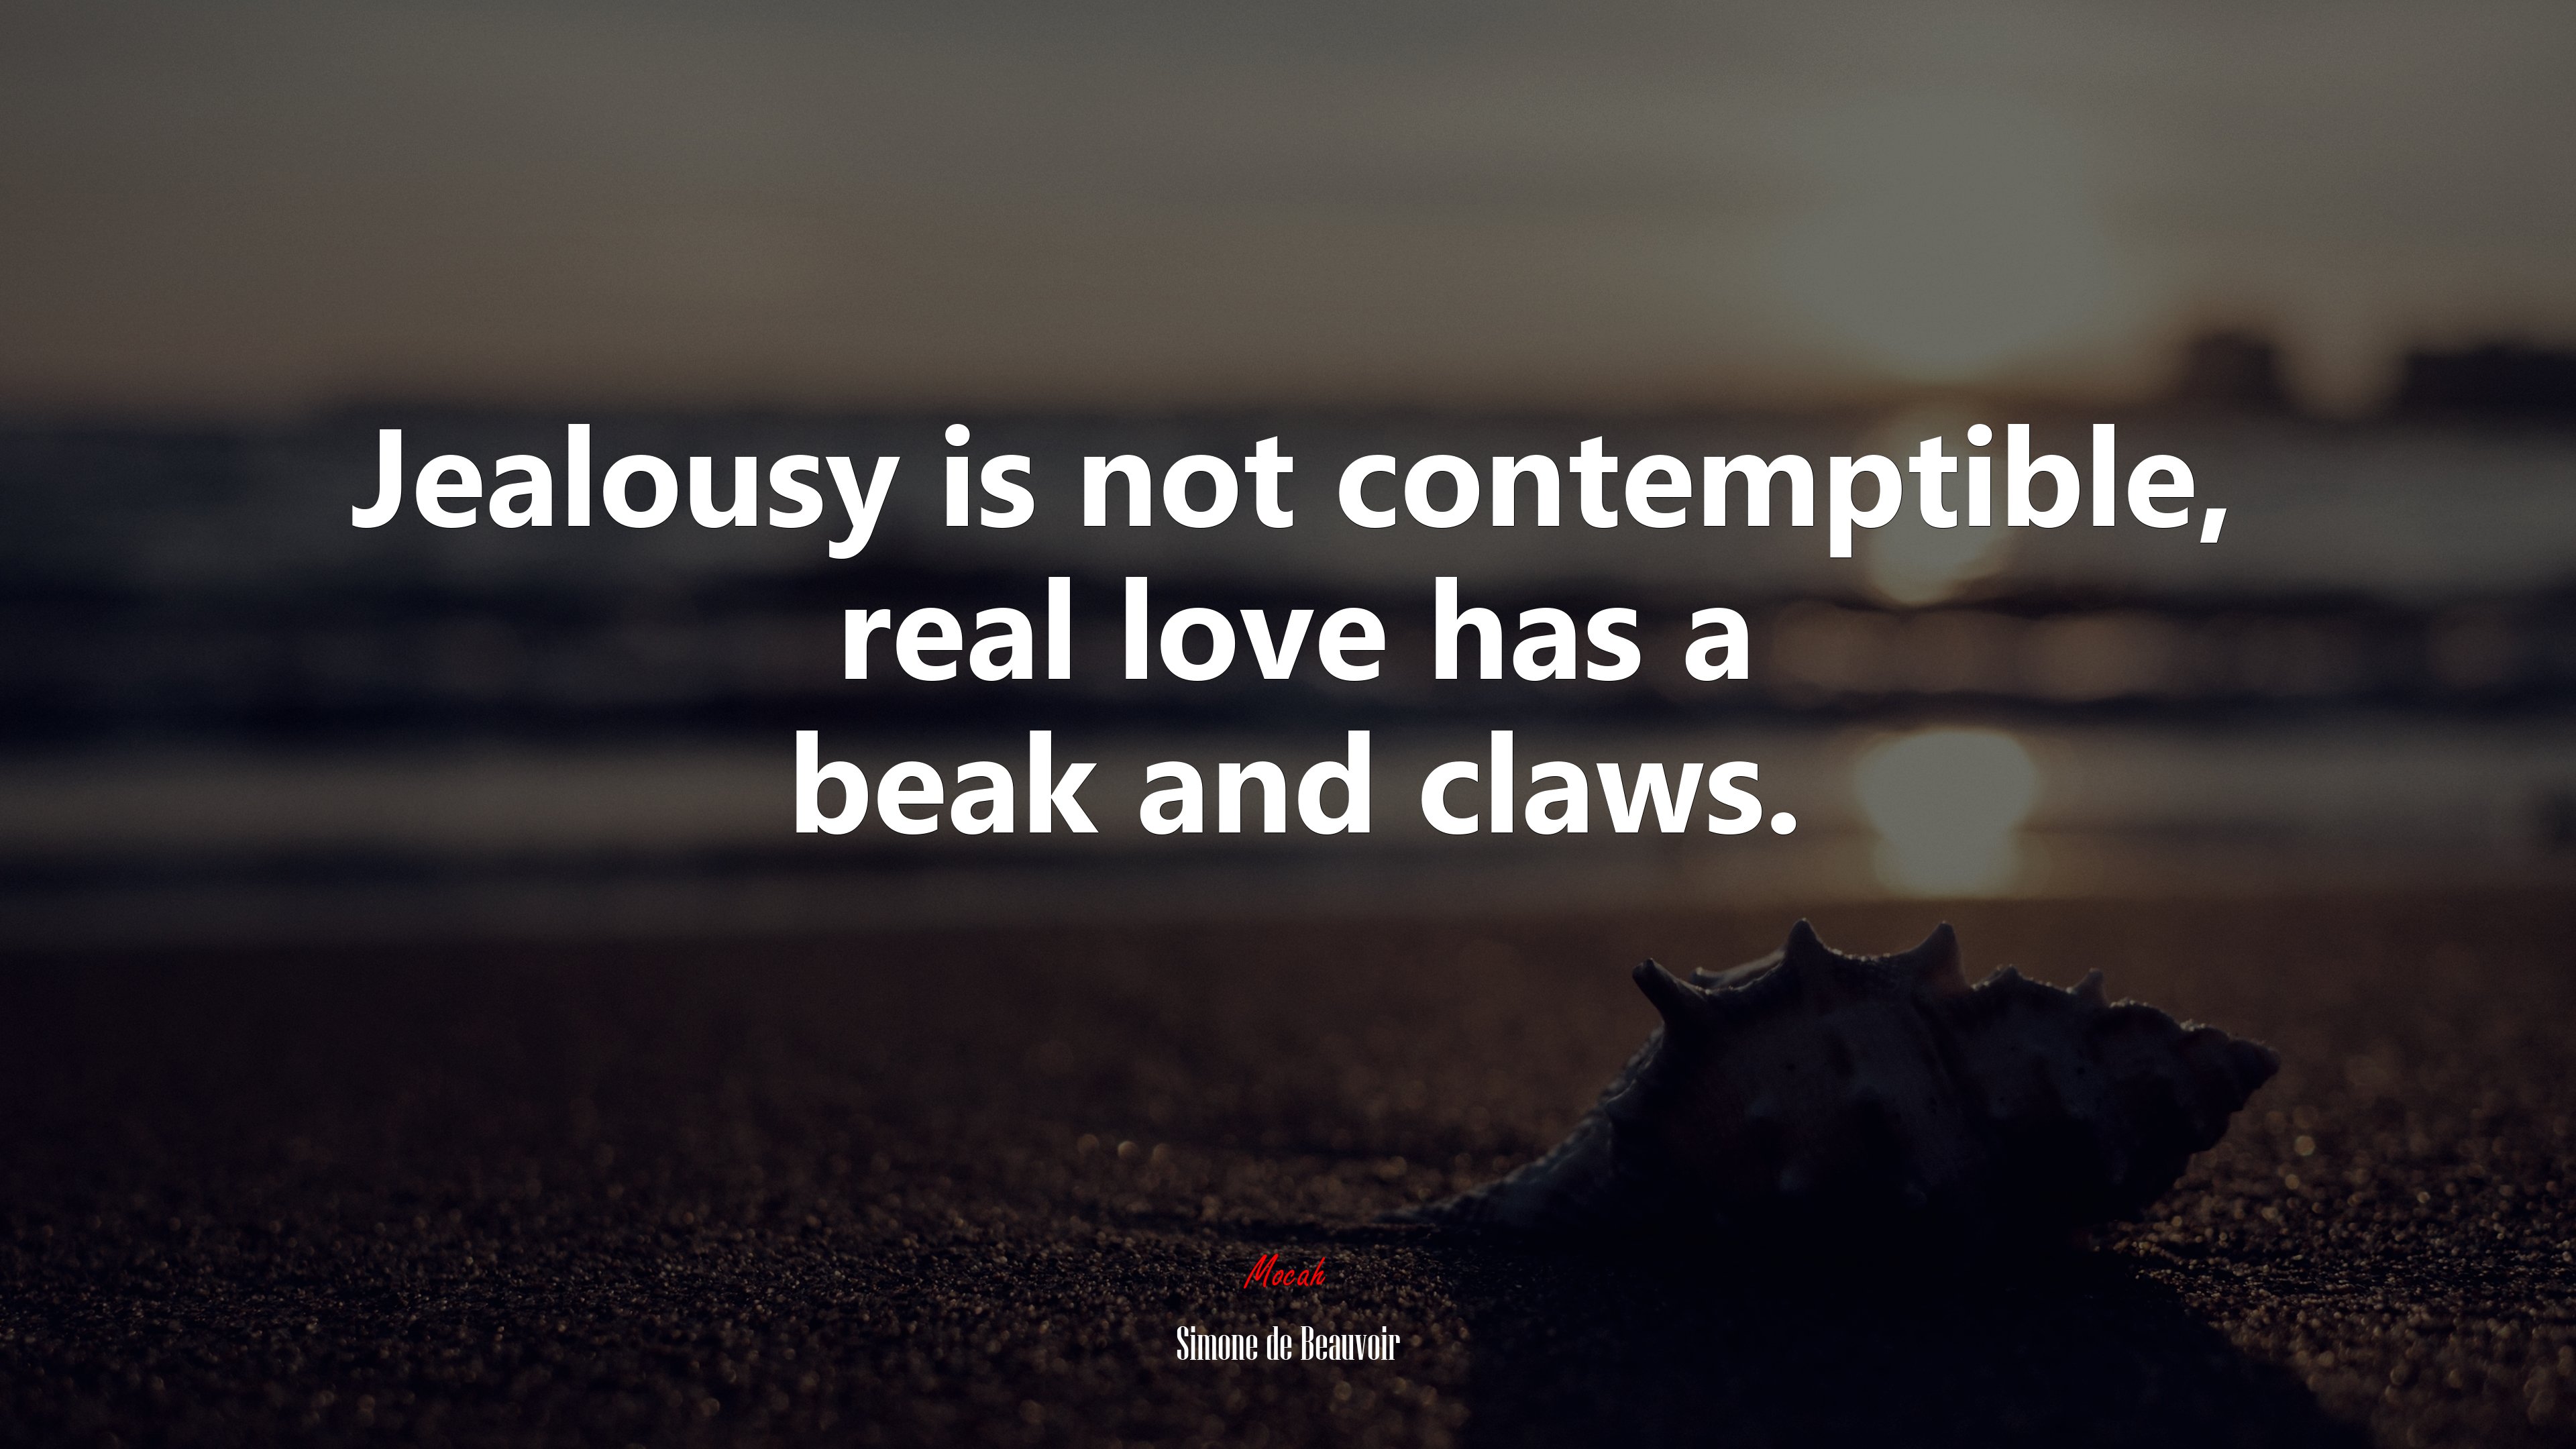 Jealousy is not contemptible, real love has a beak and claws. Simone de Beauvoir quote, 4k wallpaper. Mocah HD Wallpaper